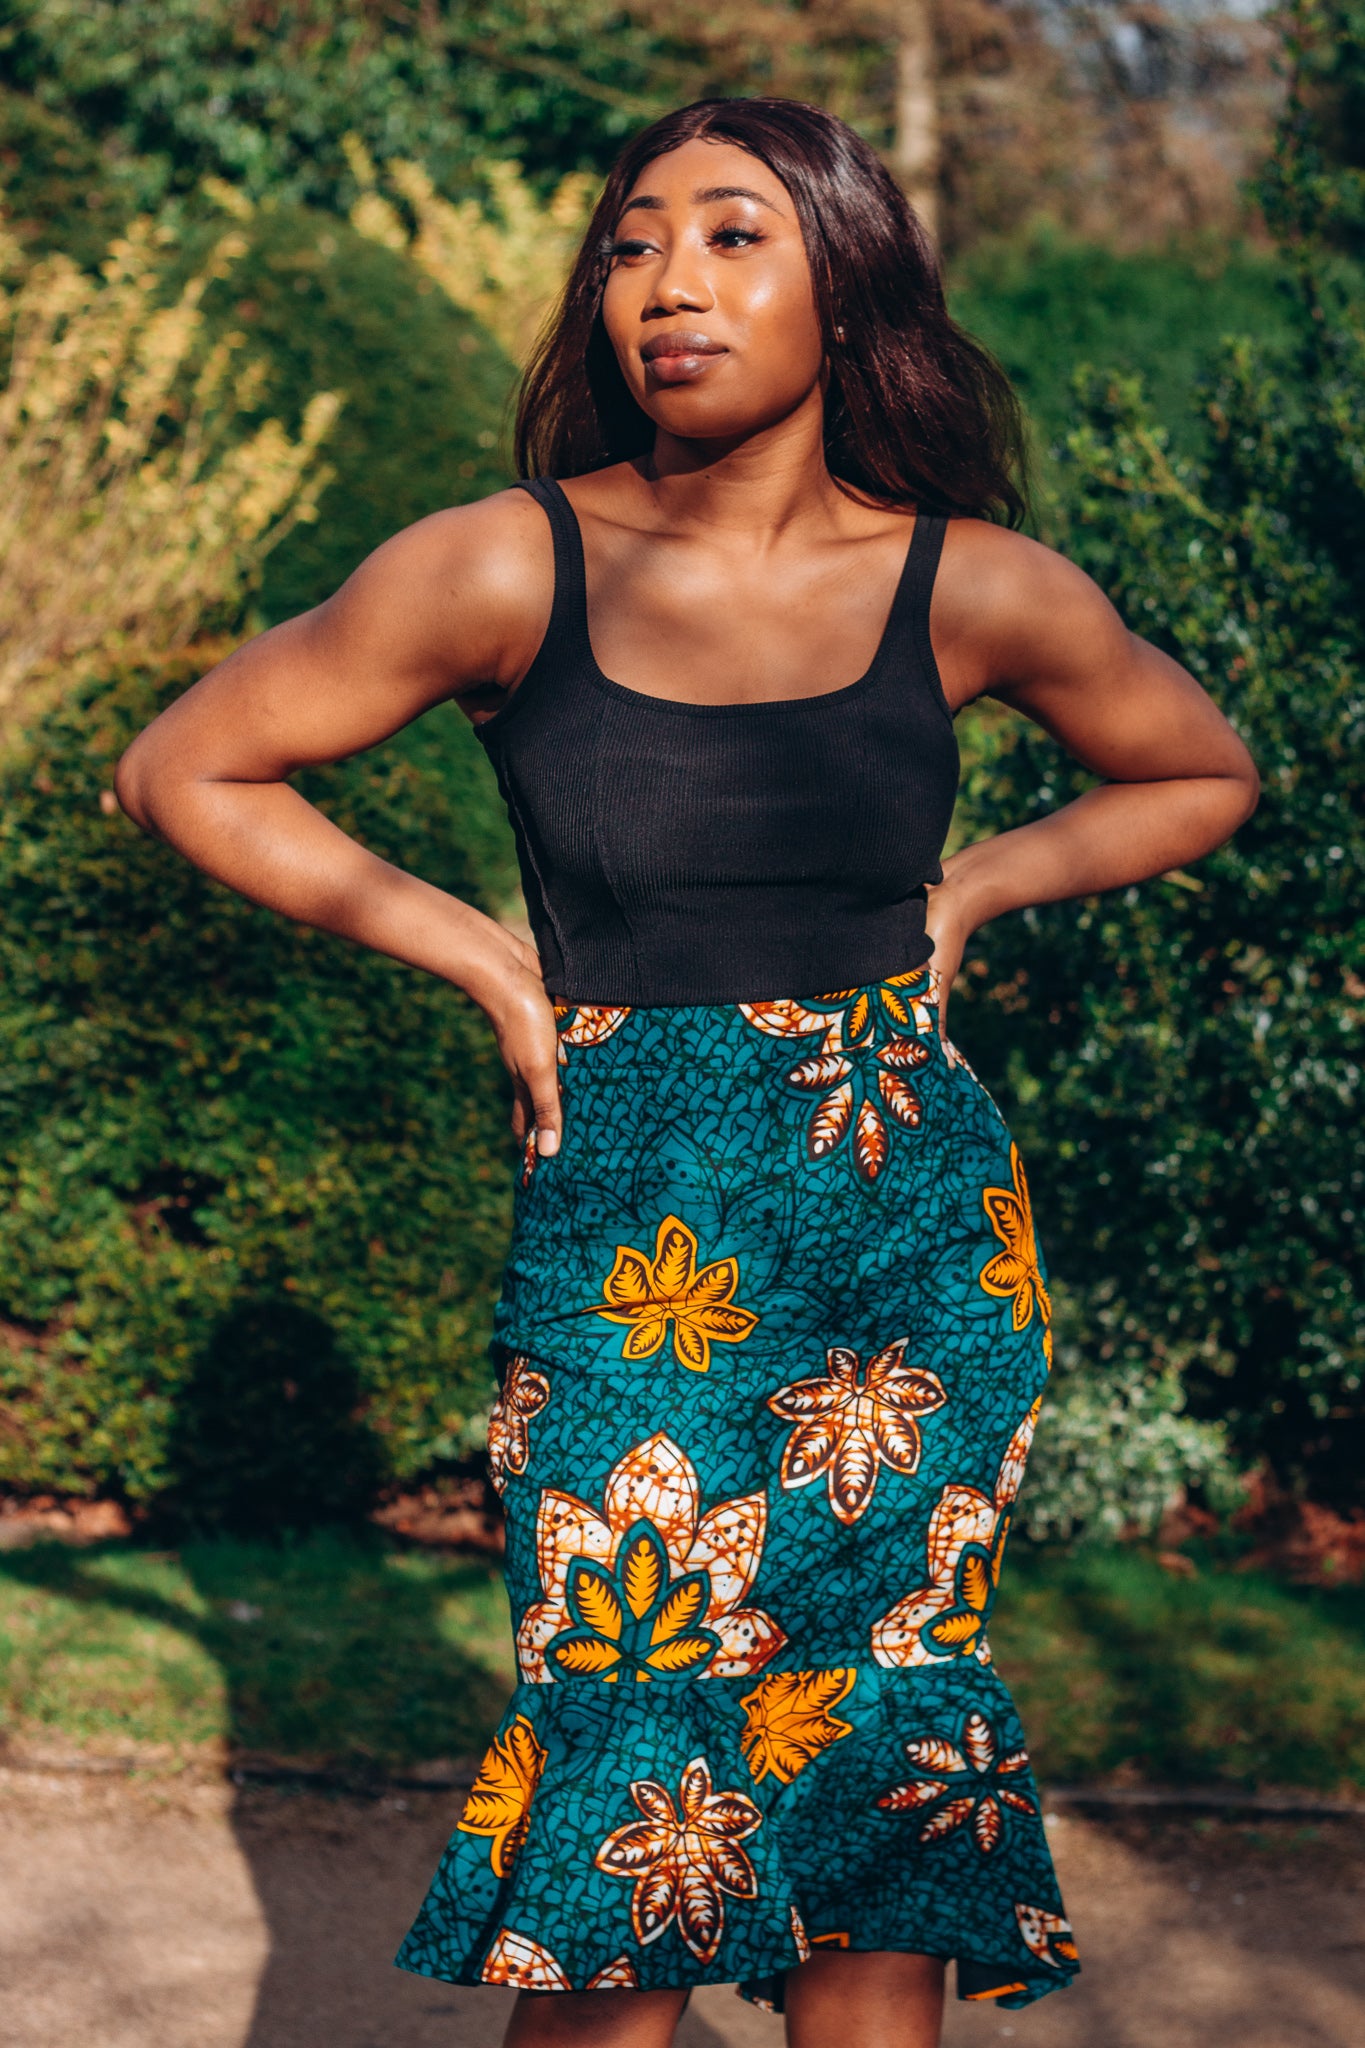 Orange, yellow, white and green African print High Waisted knee length Flared fishtail Skirt with seamed belt detailing in a floral pattern, made from sustainably sourced Ankara wax print.